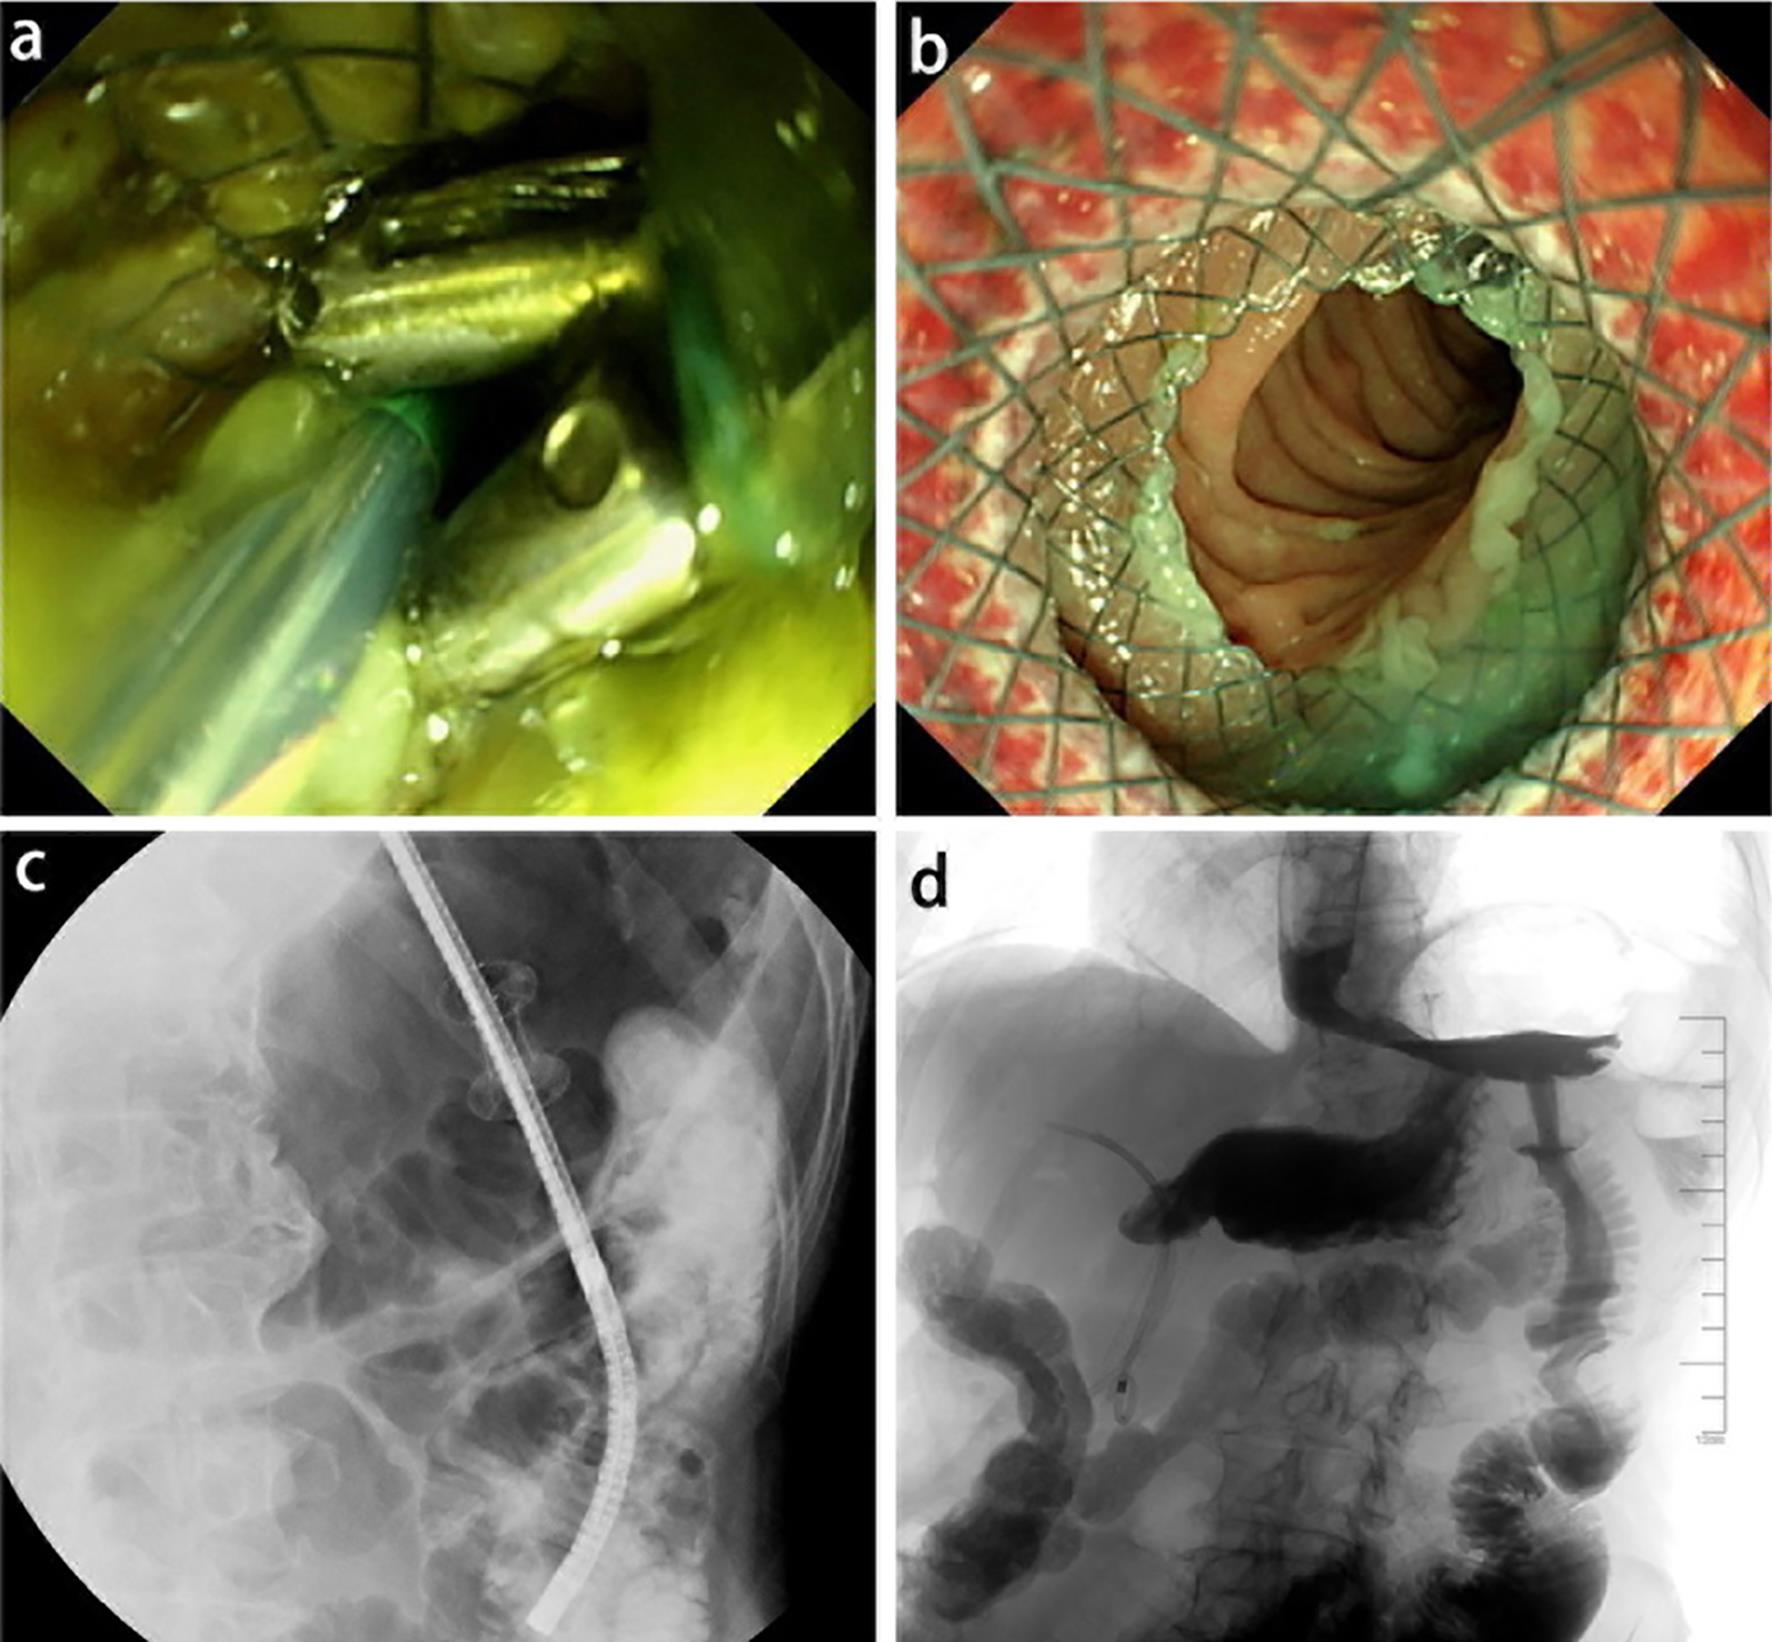 Endoscopic ultrasound-guided gastroenterostomy after disuse of a metal stent for malignant gastric outlet obstruction.